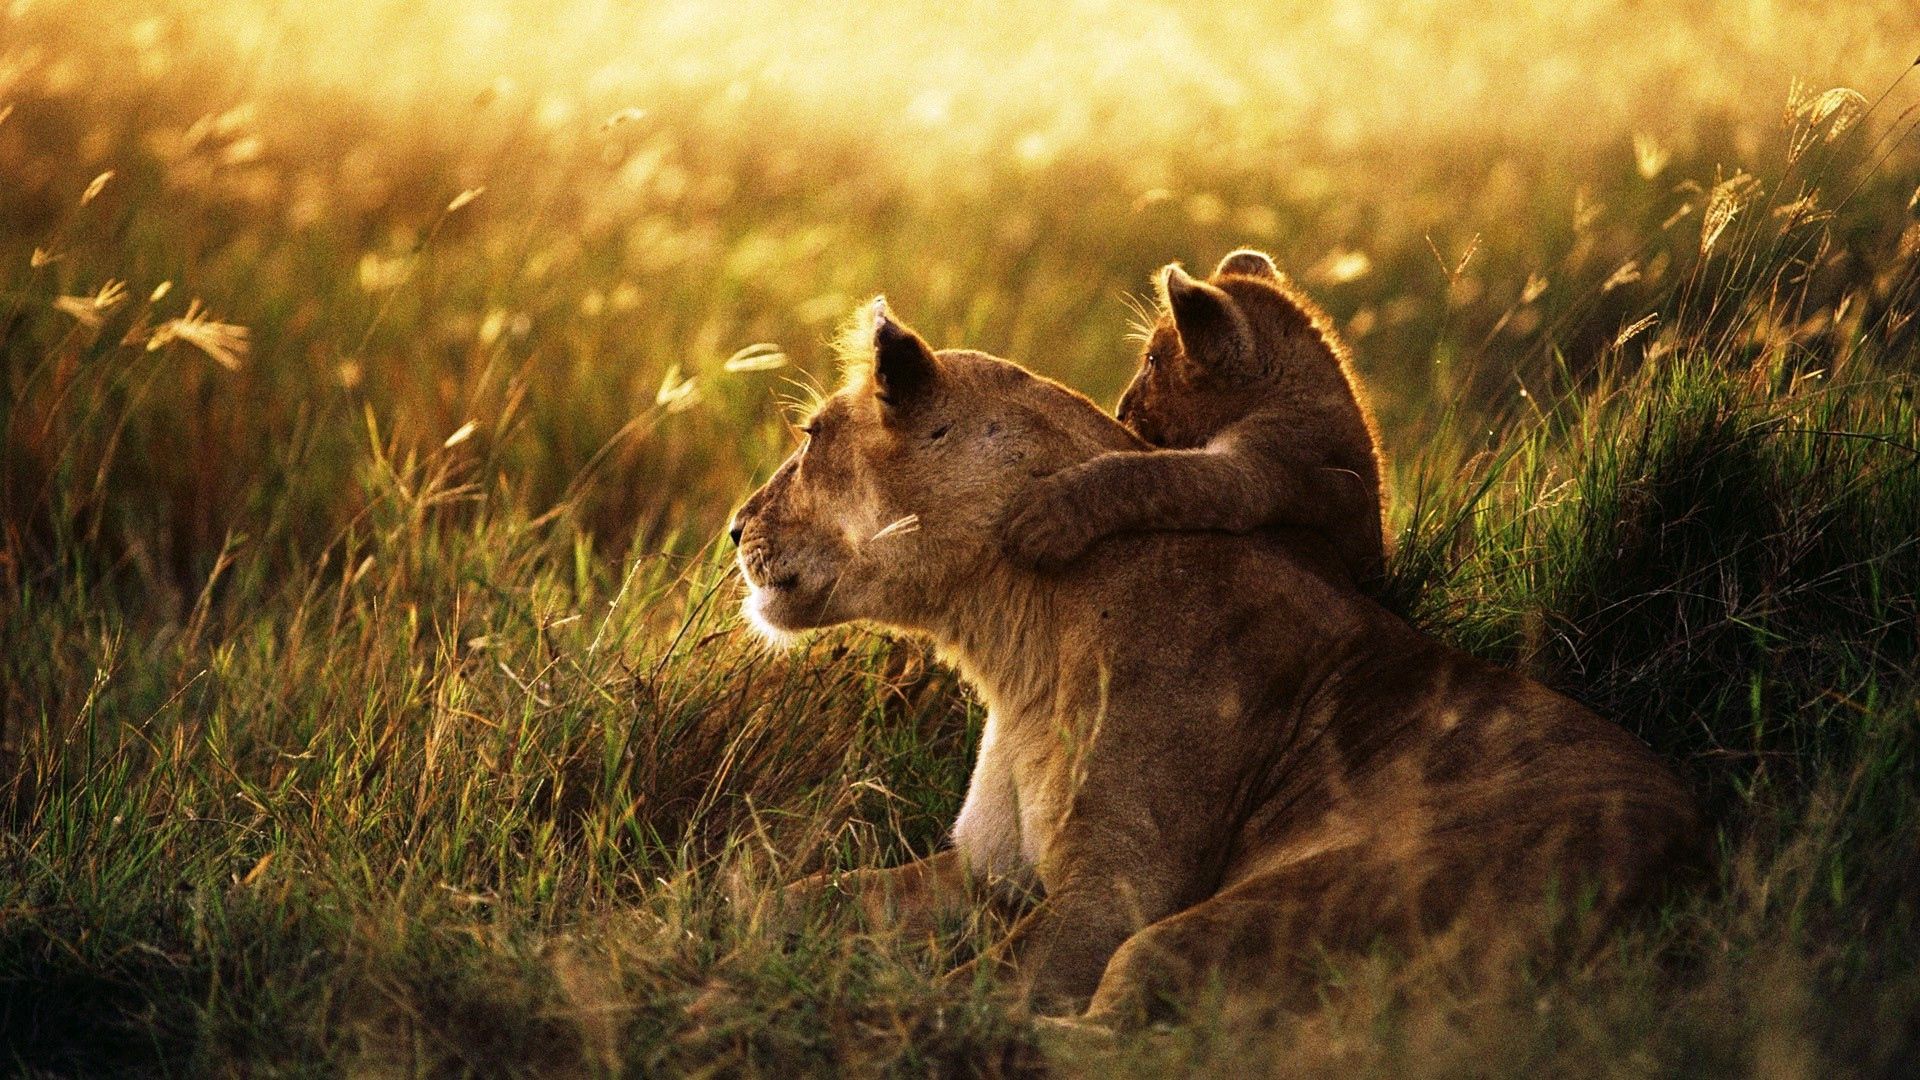 Lion, Lion Cub, Family, Cub, Caring, Baby, Sunshine Free Wallpapers  Download For PC - Desktop Wallpapers